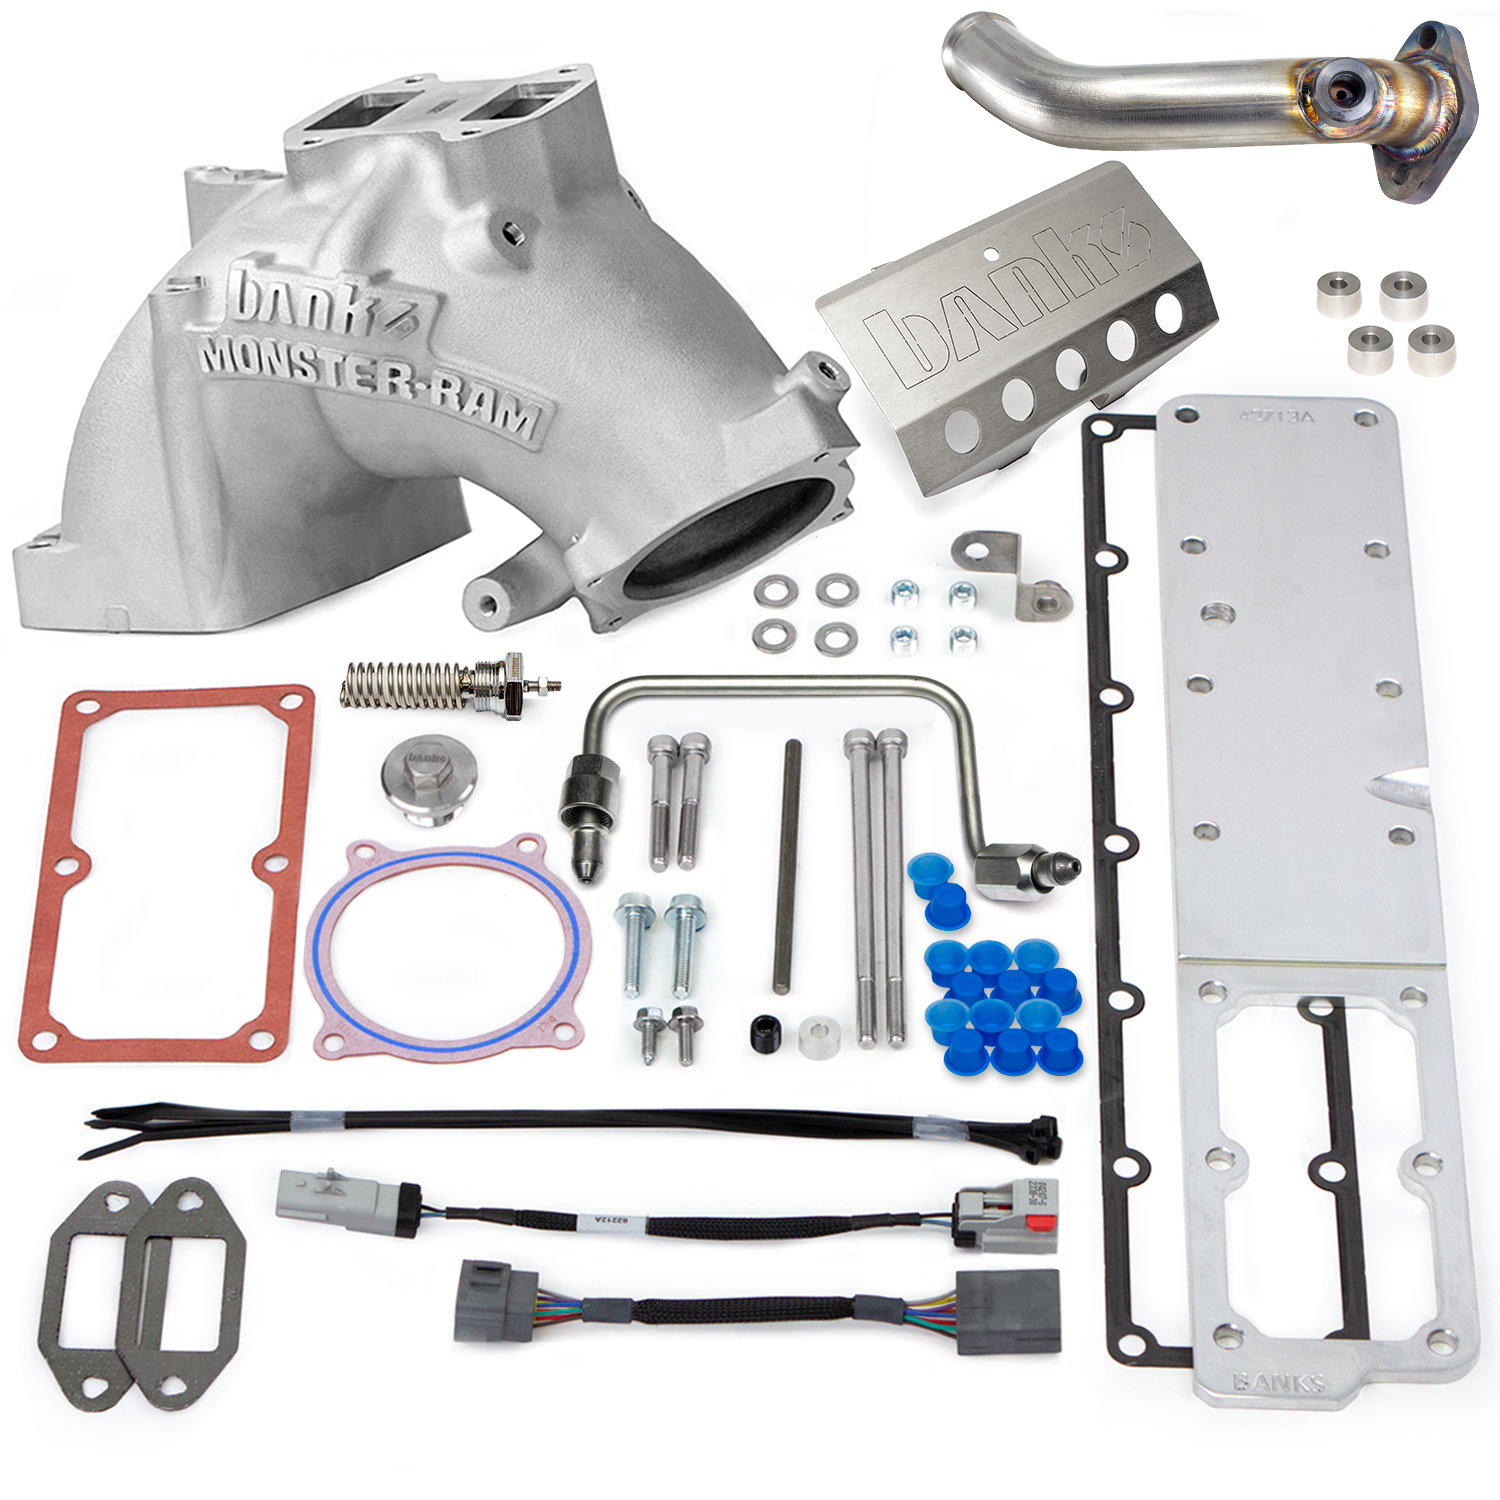 Components found in the Banks Monster-Ram for Chassis Cab RAM 6.7L Trucks In Natural Finish